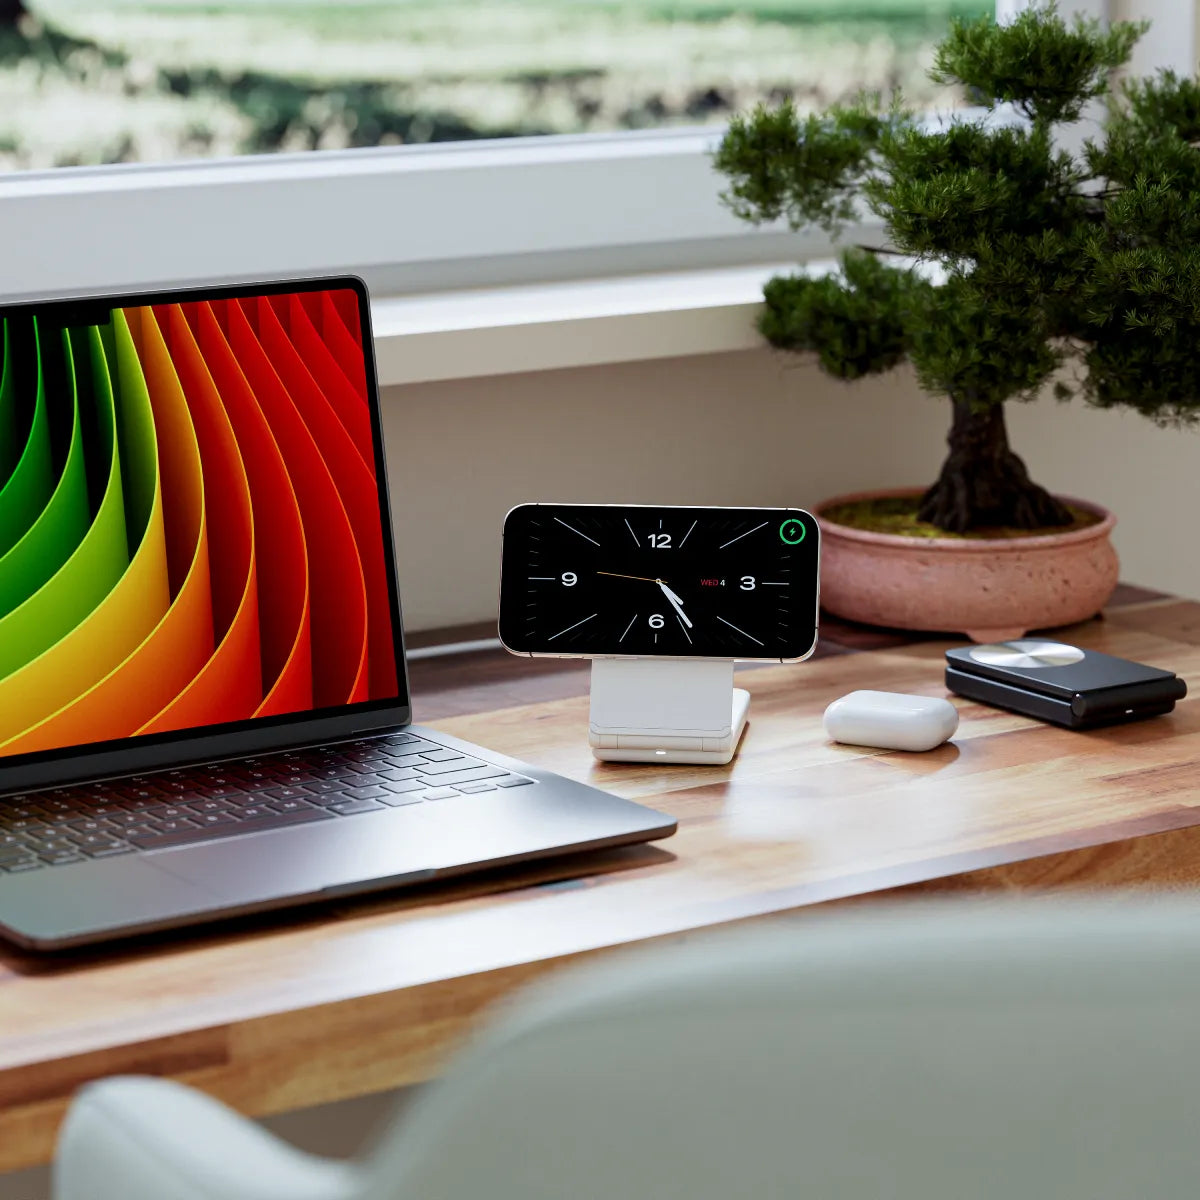 YOGA 3-in-1 Wireless Charging Stand